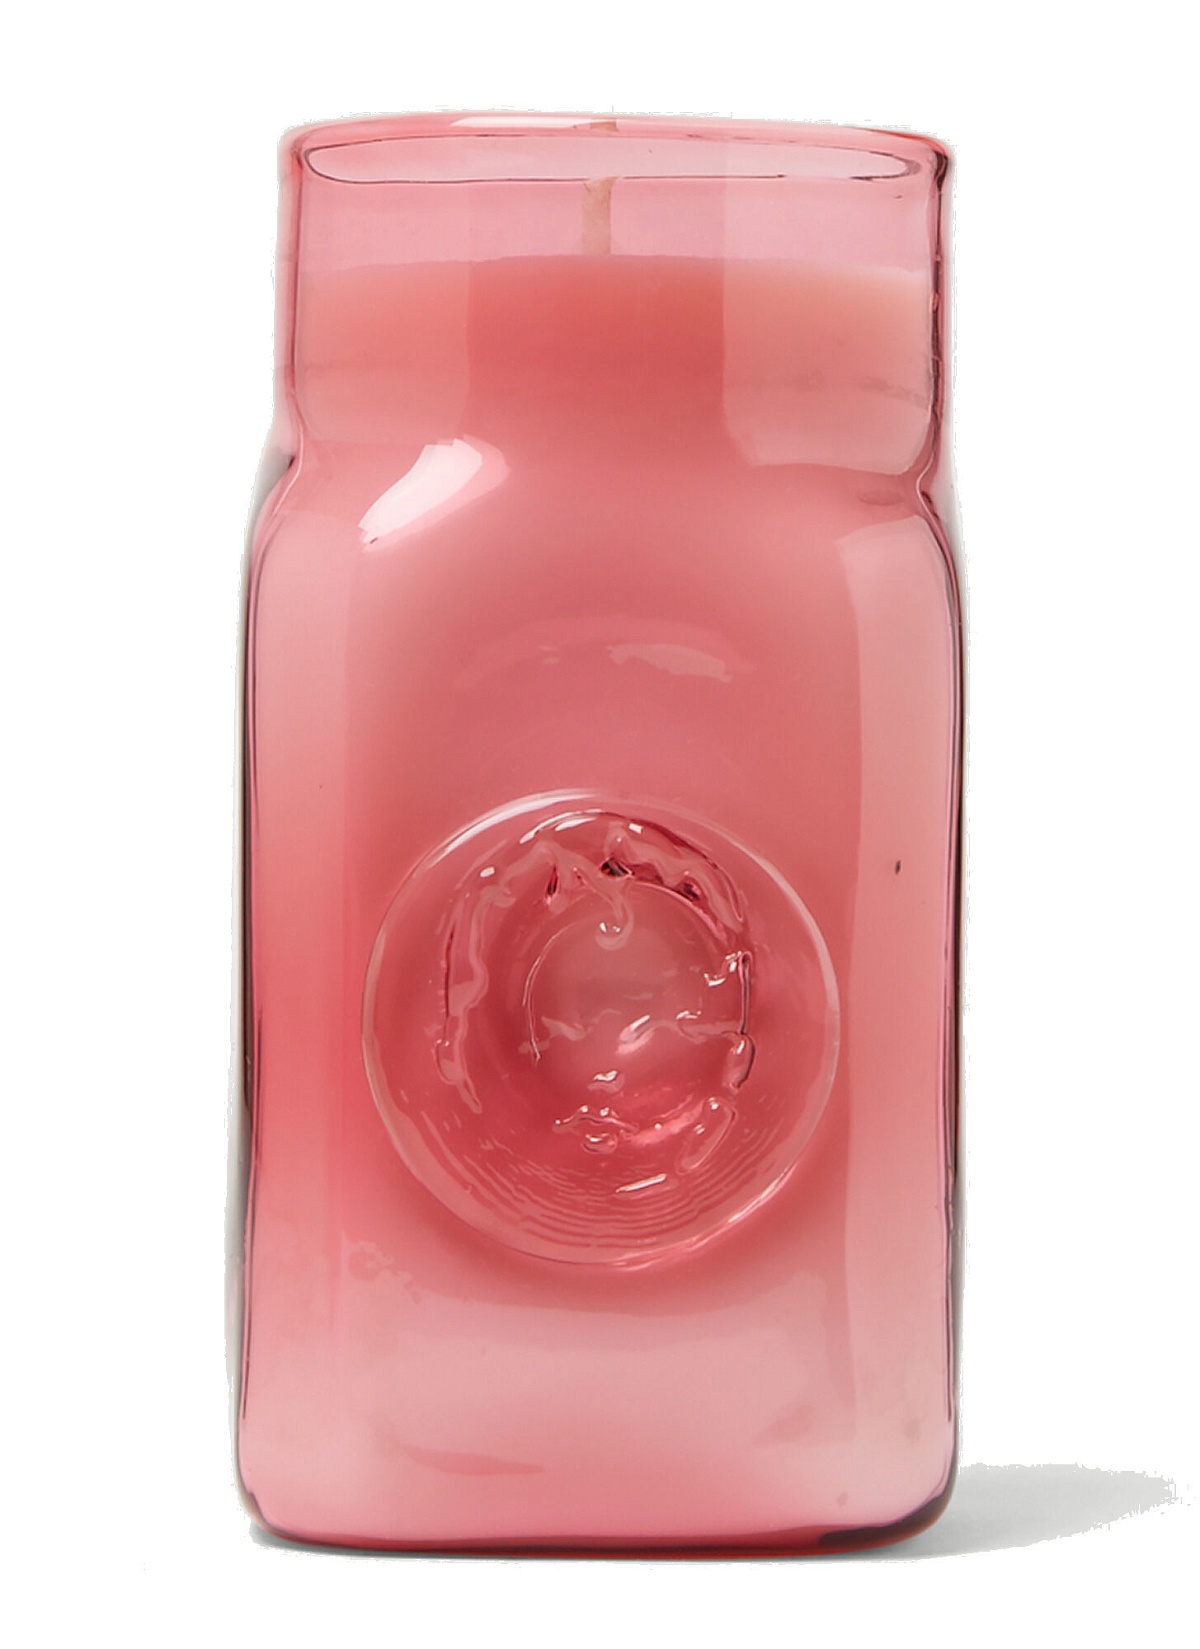 Photo: Purotu Rose Candle in Pink